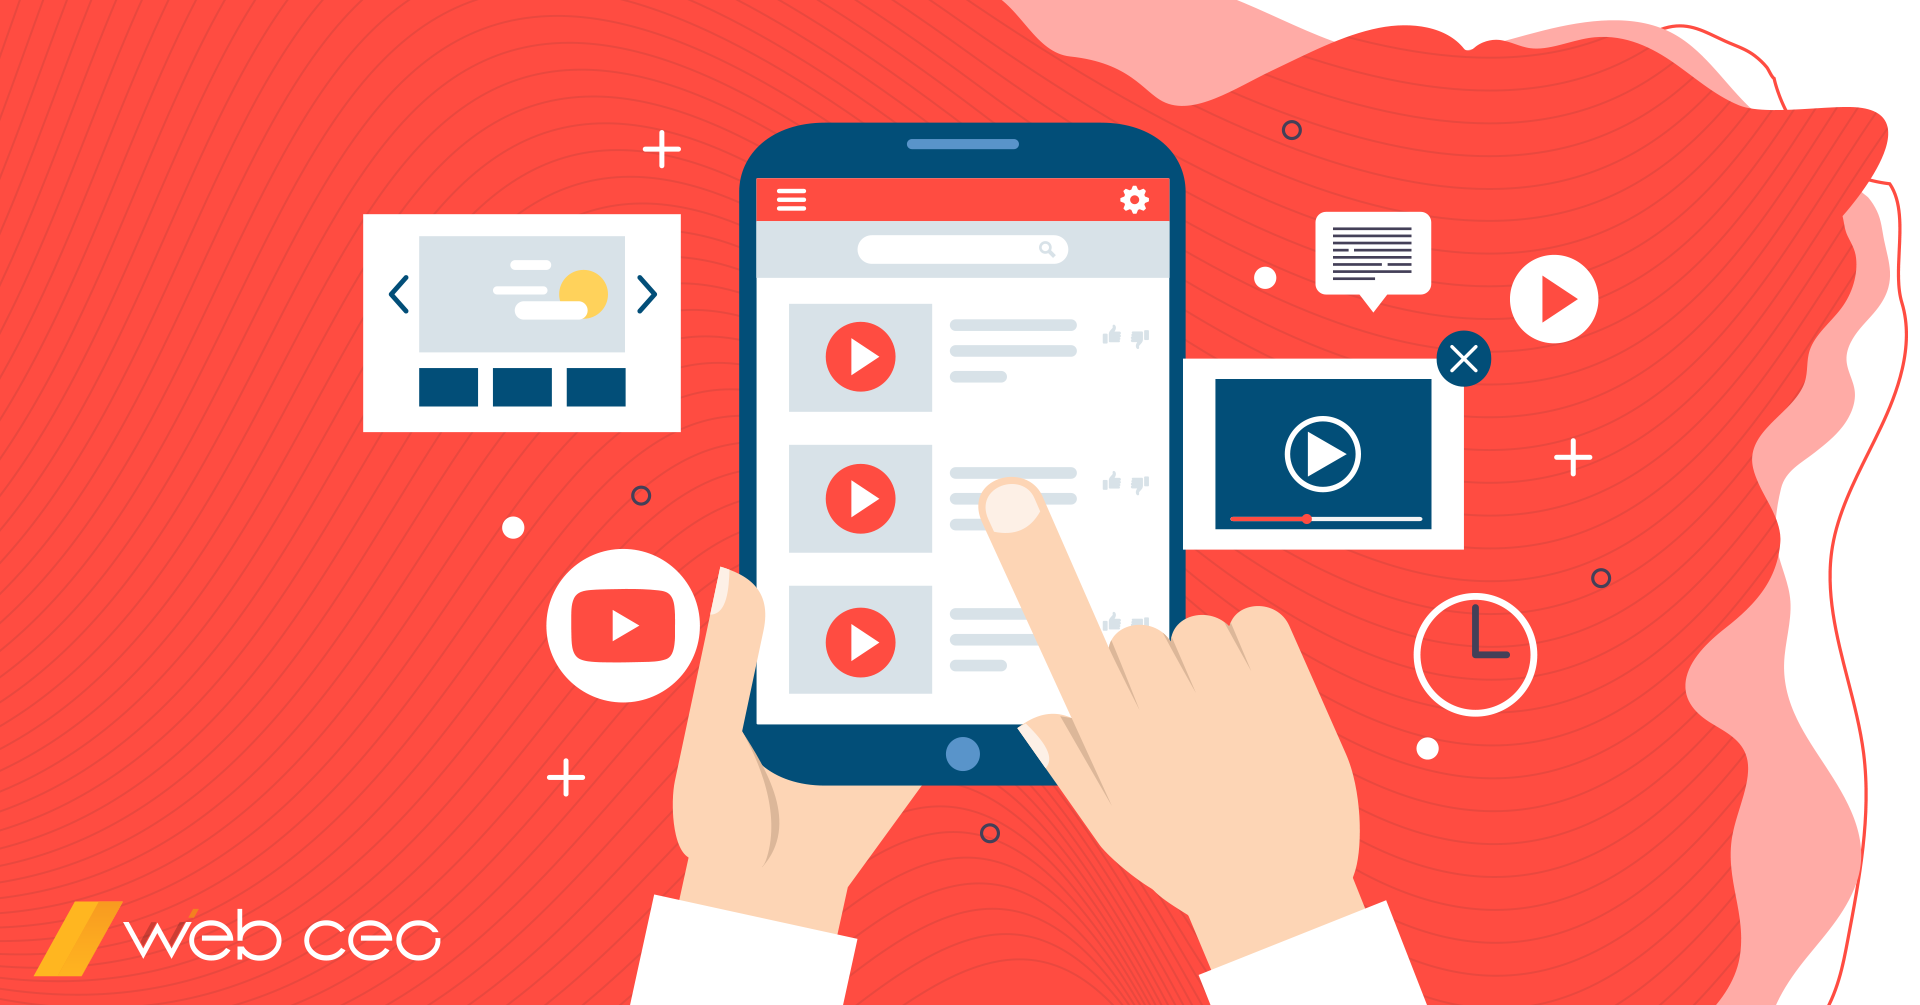 YouTube SEO Guide: How to Optimize Videos in 2022